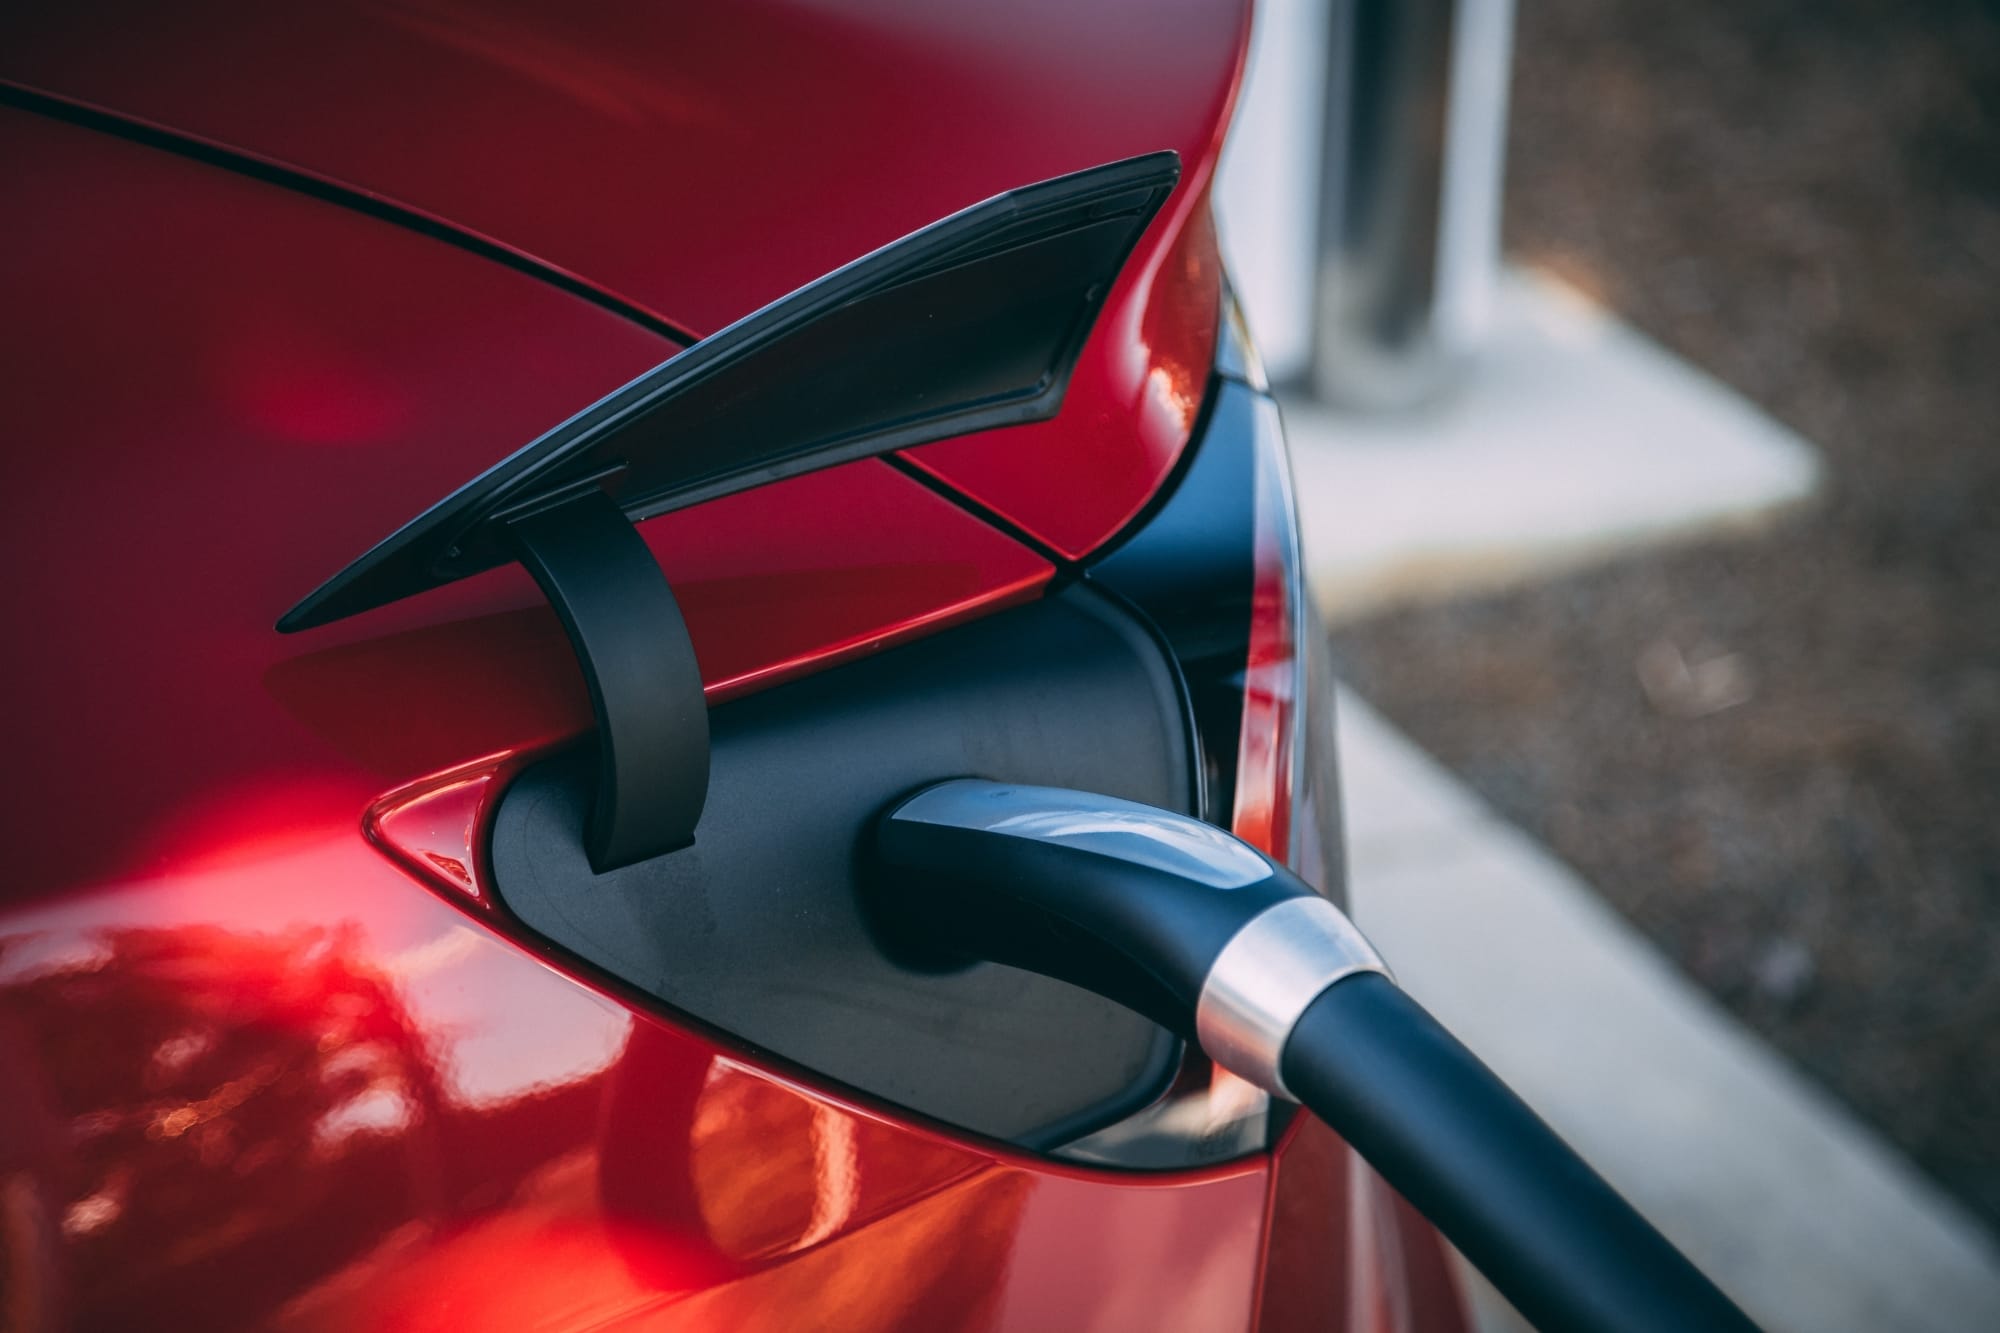 Electricity is the new Gasoline | EV charger